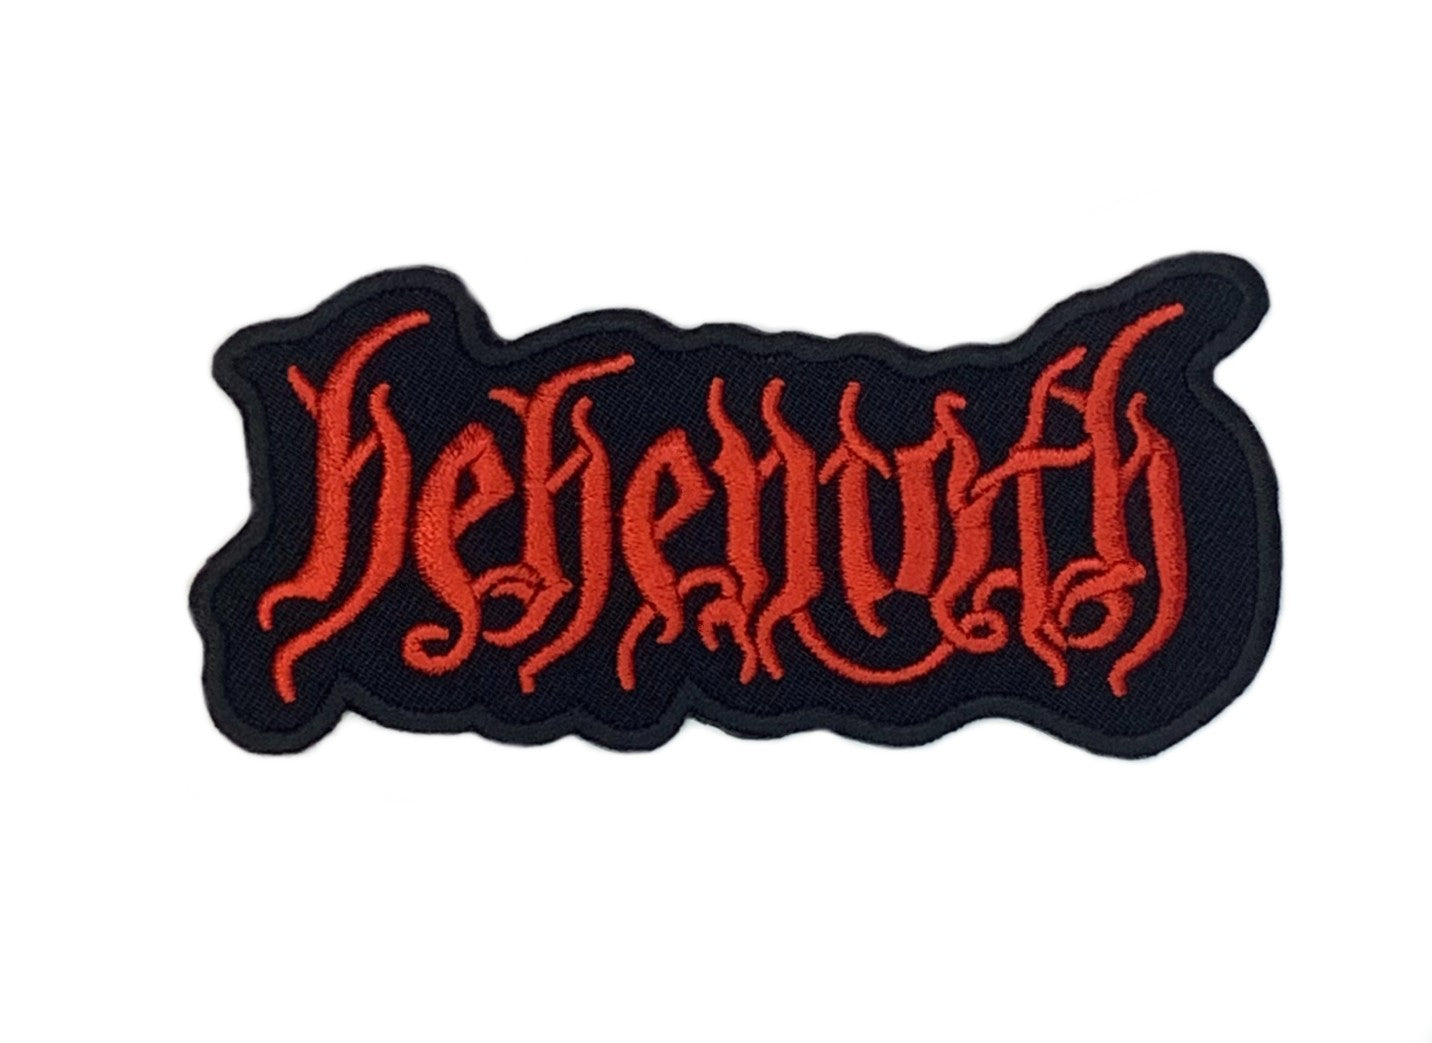 Behemoth Logo Patch (4 Inches) Iron/Sew-on Bade Heavy Metal Band Biker Patches